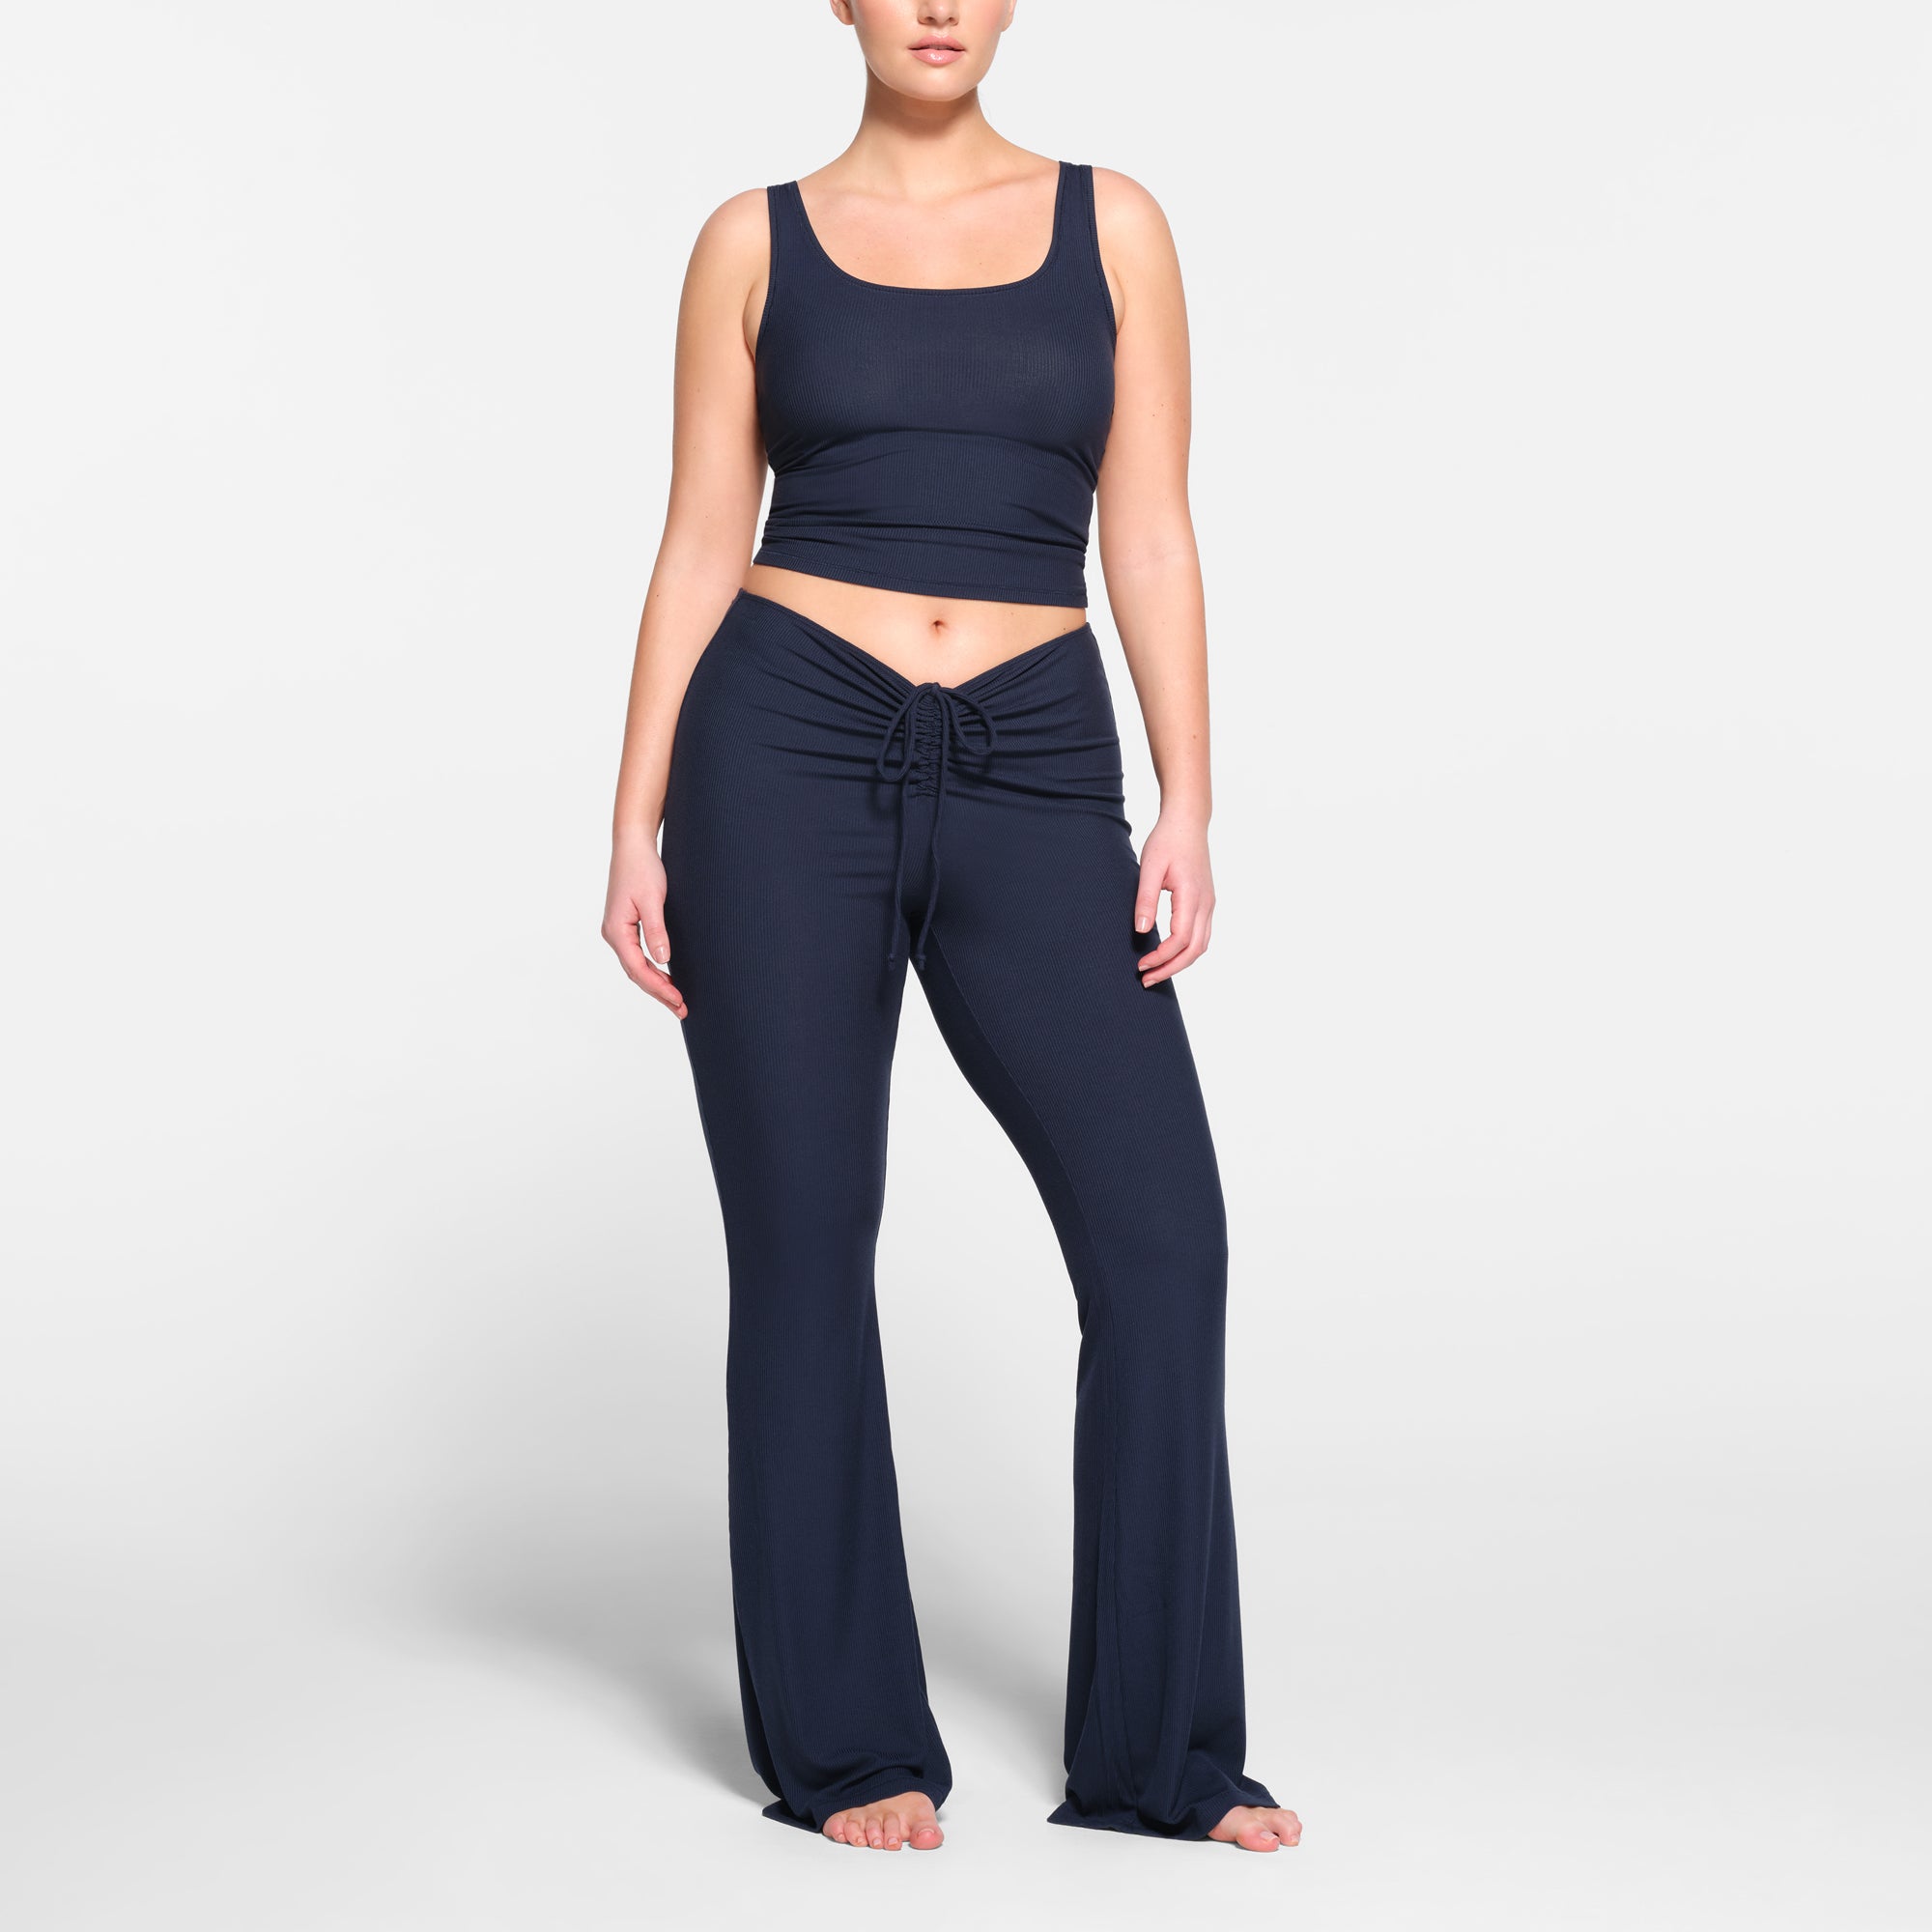 Soft Lounge Ruched Pant  Ruched pants, Bootcut pants, Ruching